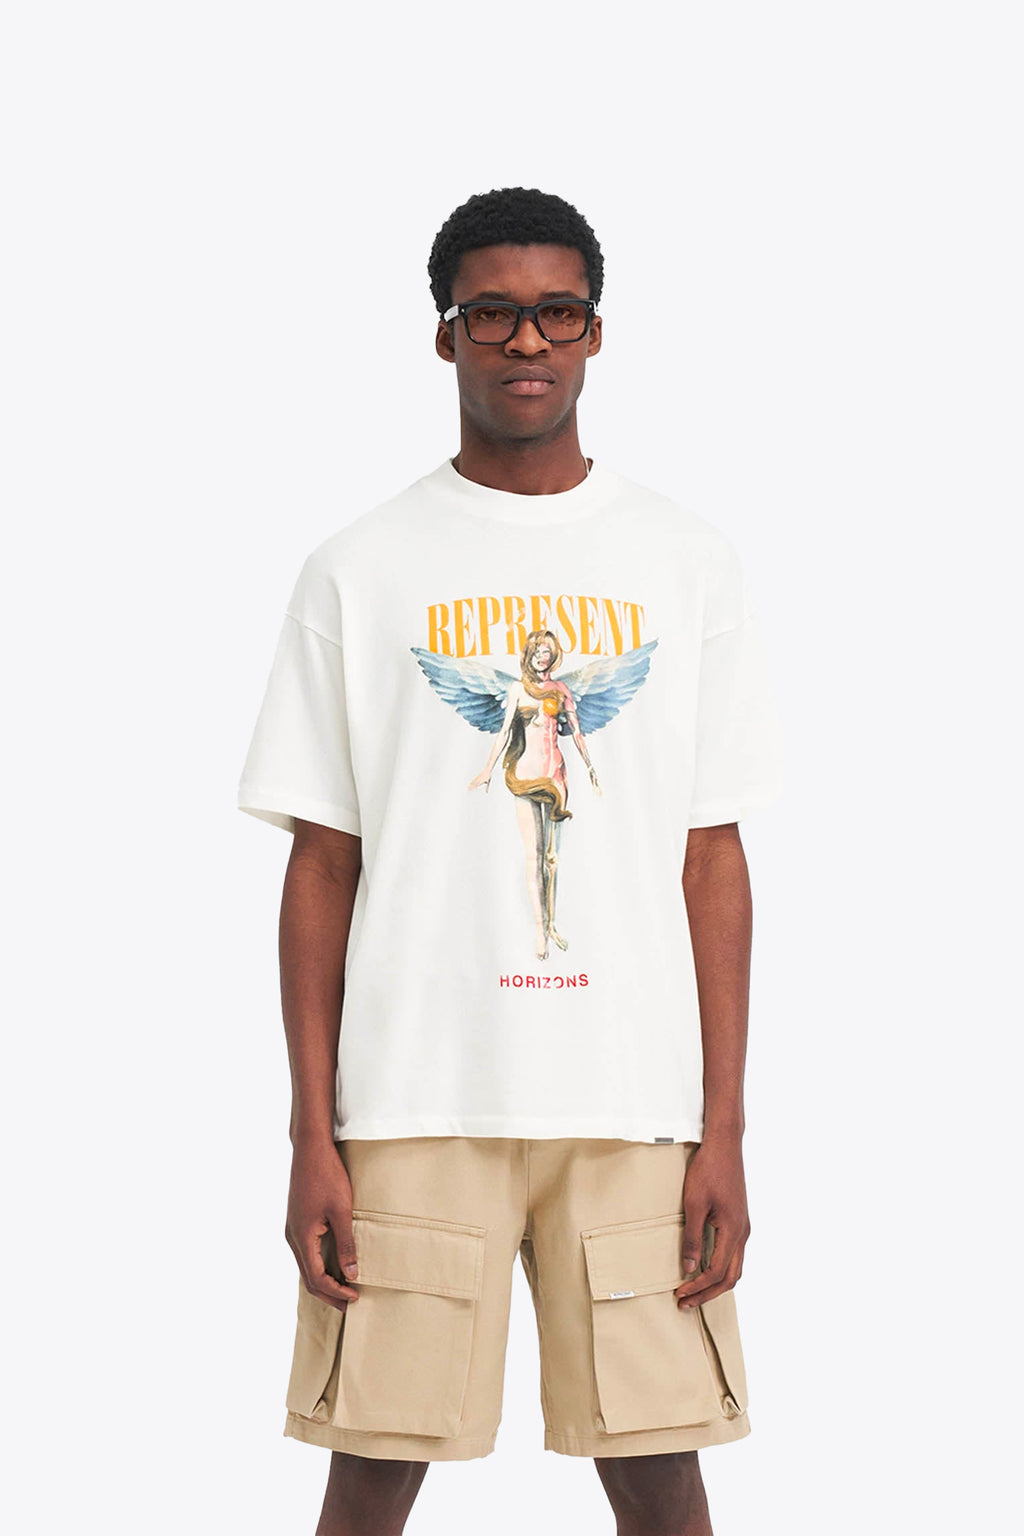 alt-image__Off-white-t-shirt-with-graphic-print-and-logo---Reborn-T-Shirt